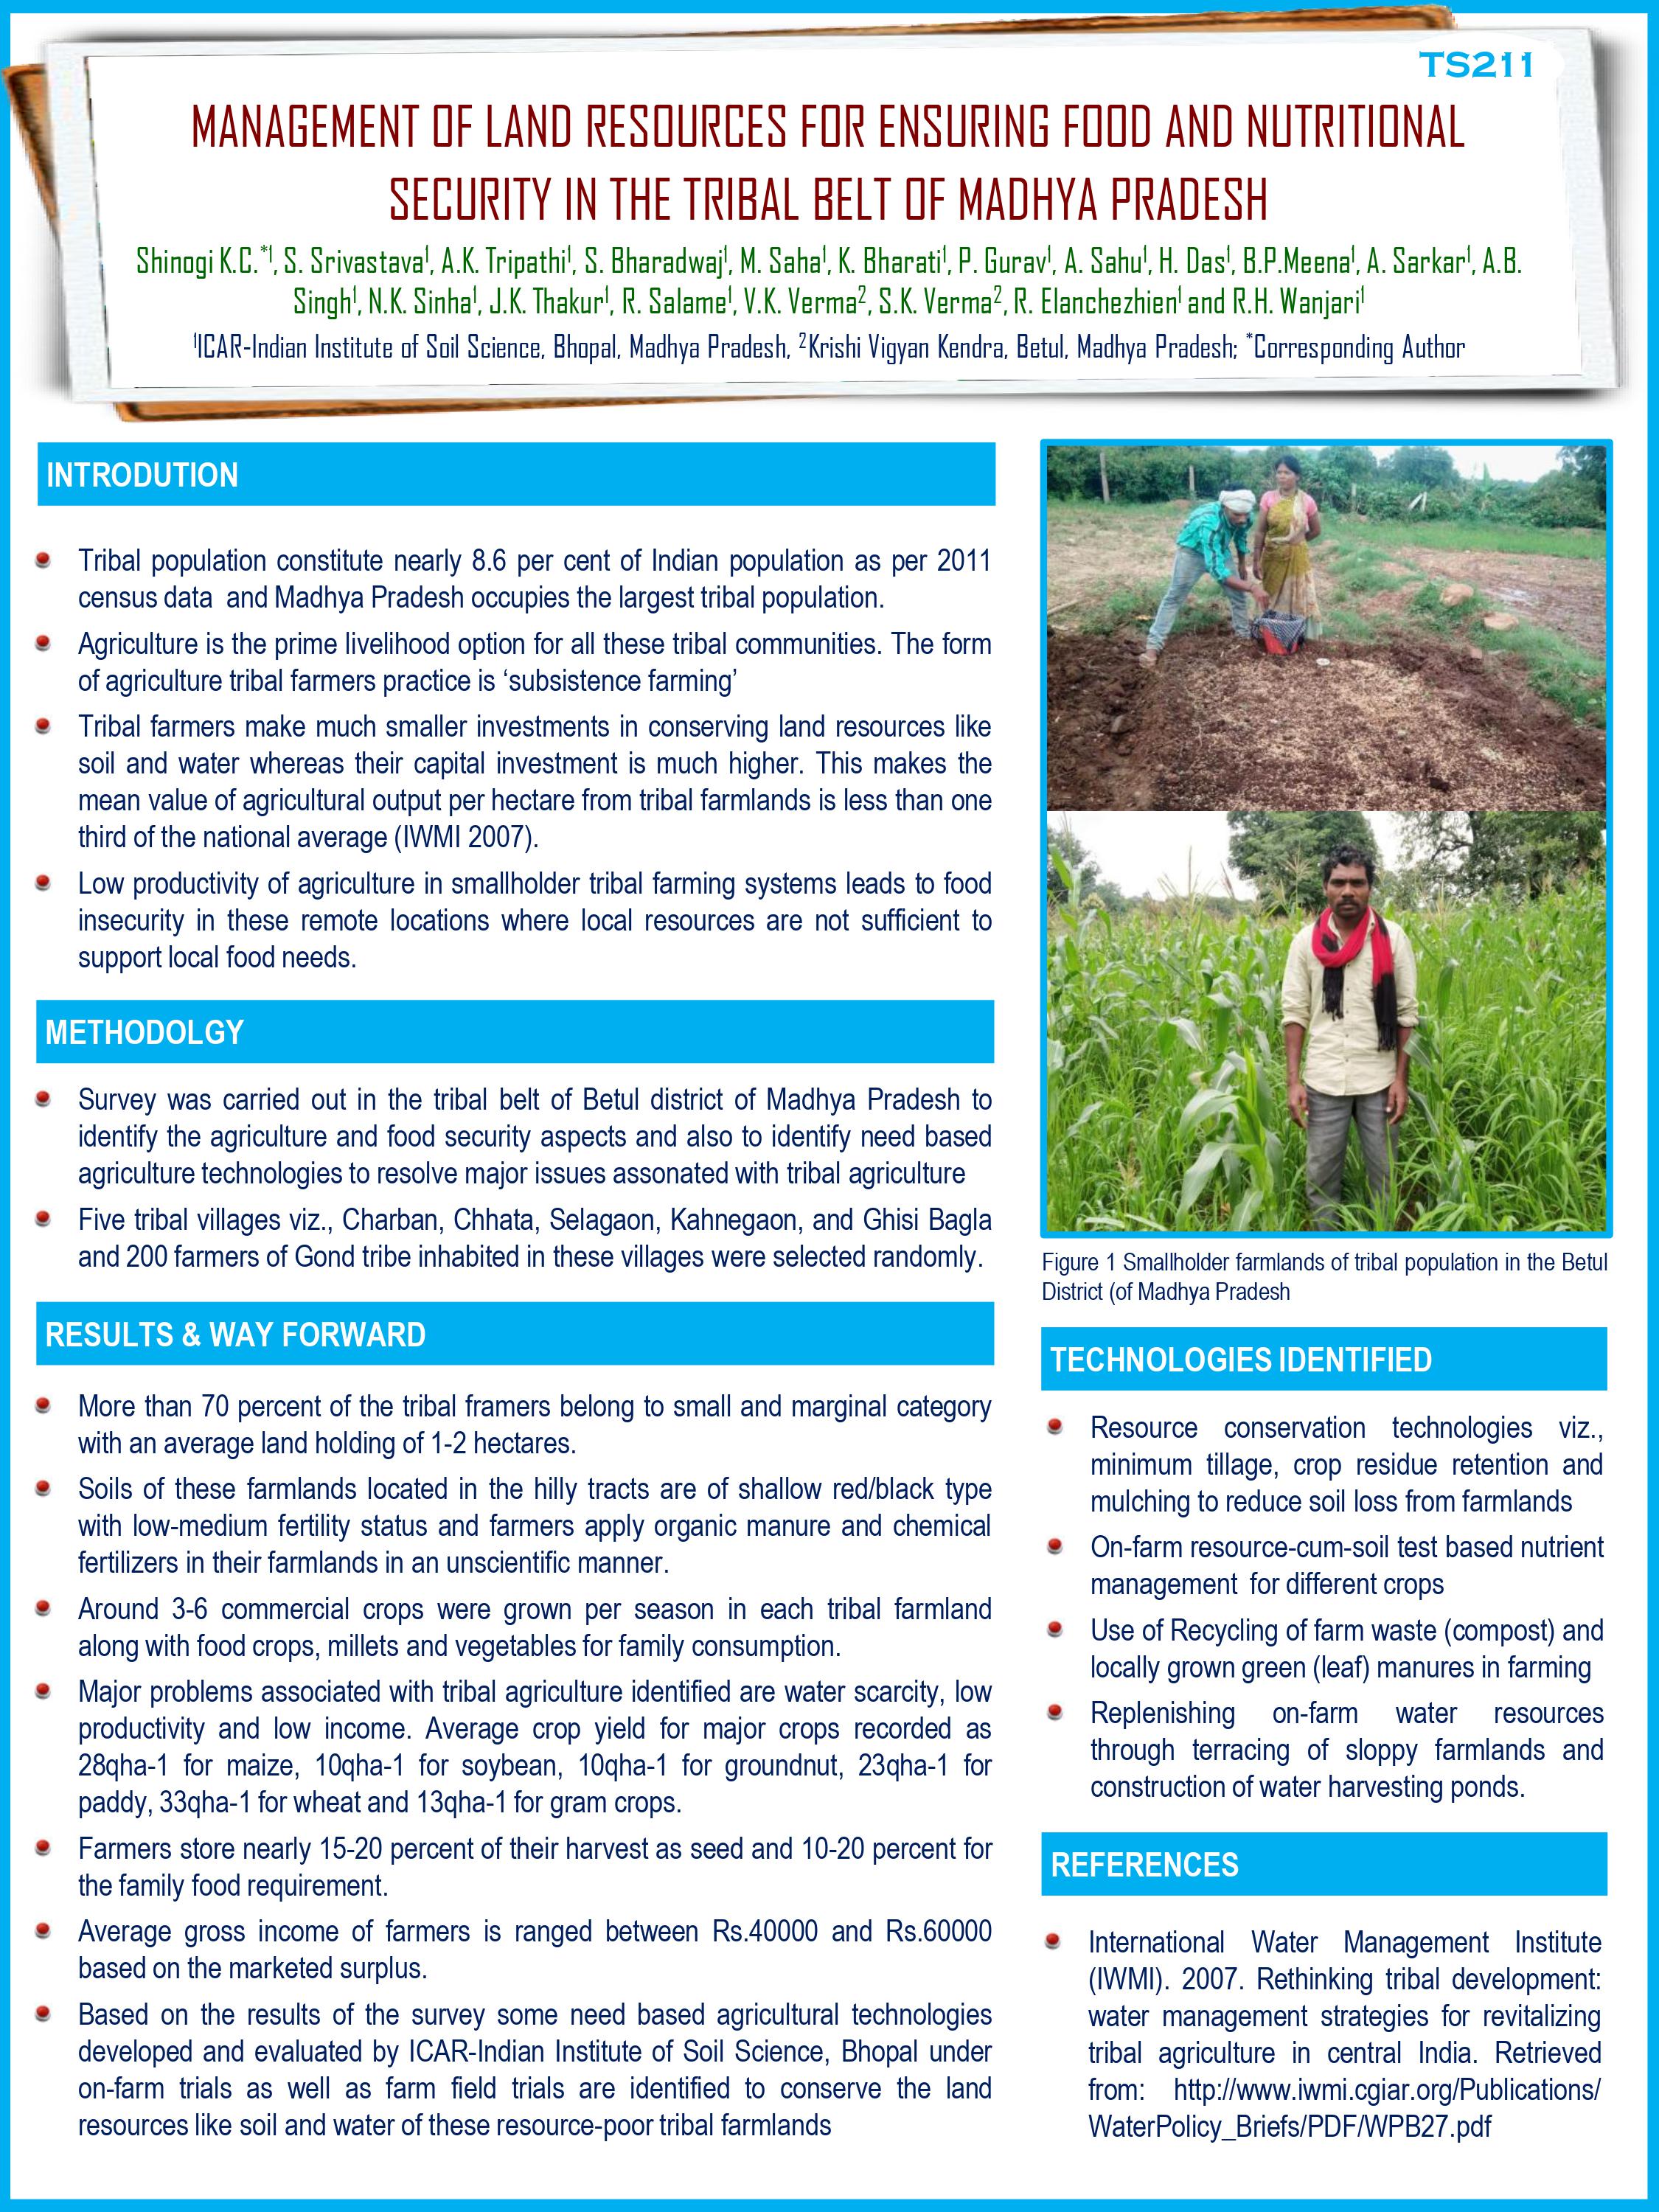 Management of Land Resources for Ensuring Food and Nutritional Security in the Tribal Belt of Madhya Pradesh